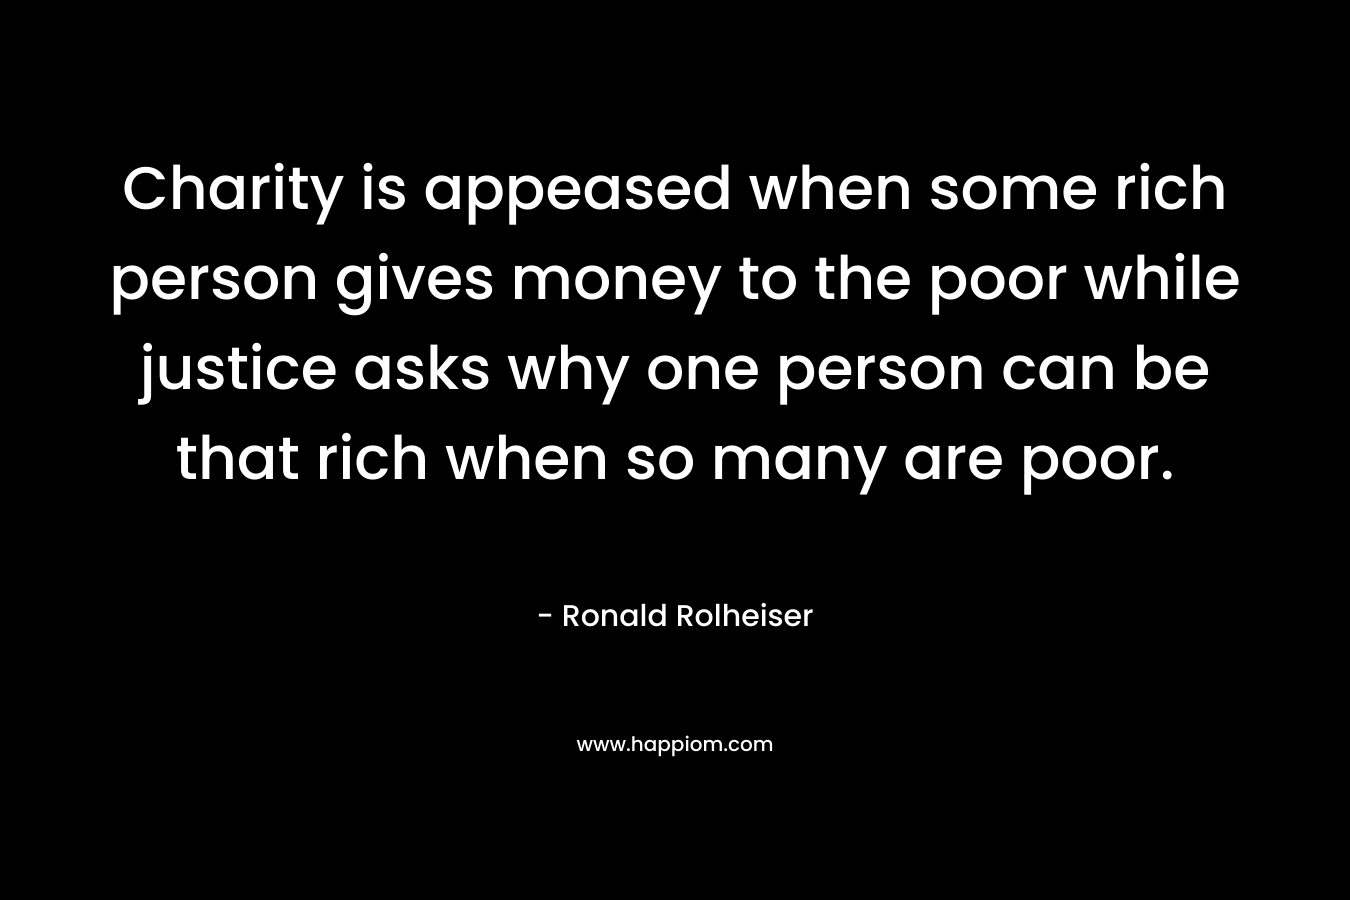 Charity is appeased when some rich person gives money to the poor while justice asks why one person can be that rich when so many are poor.